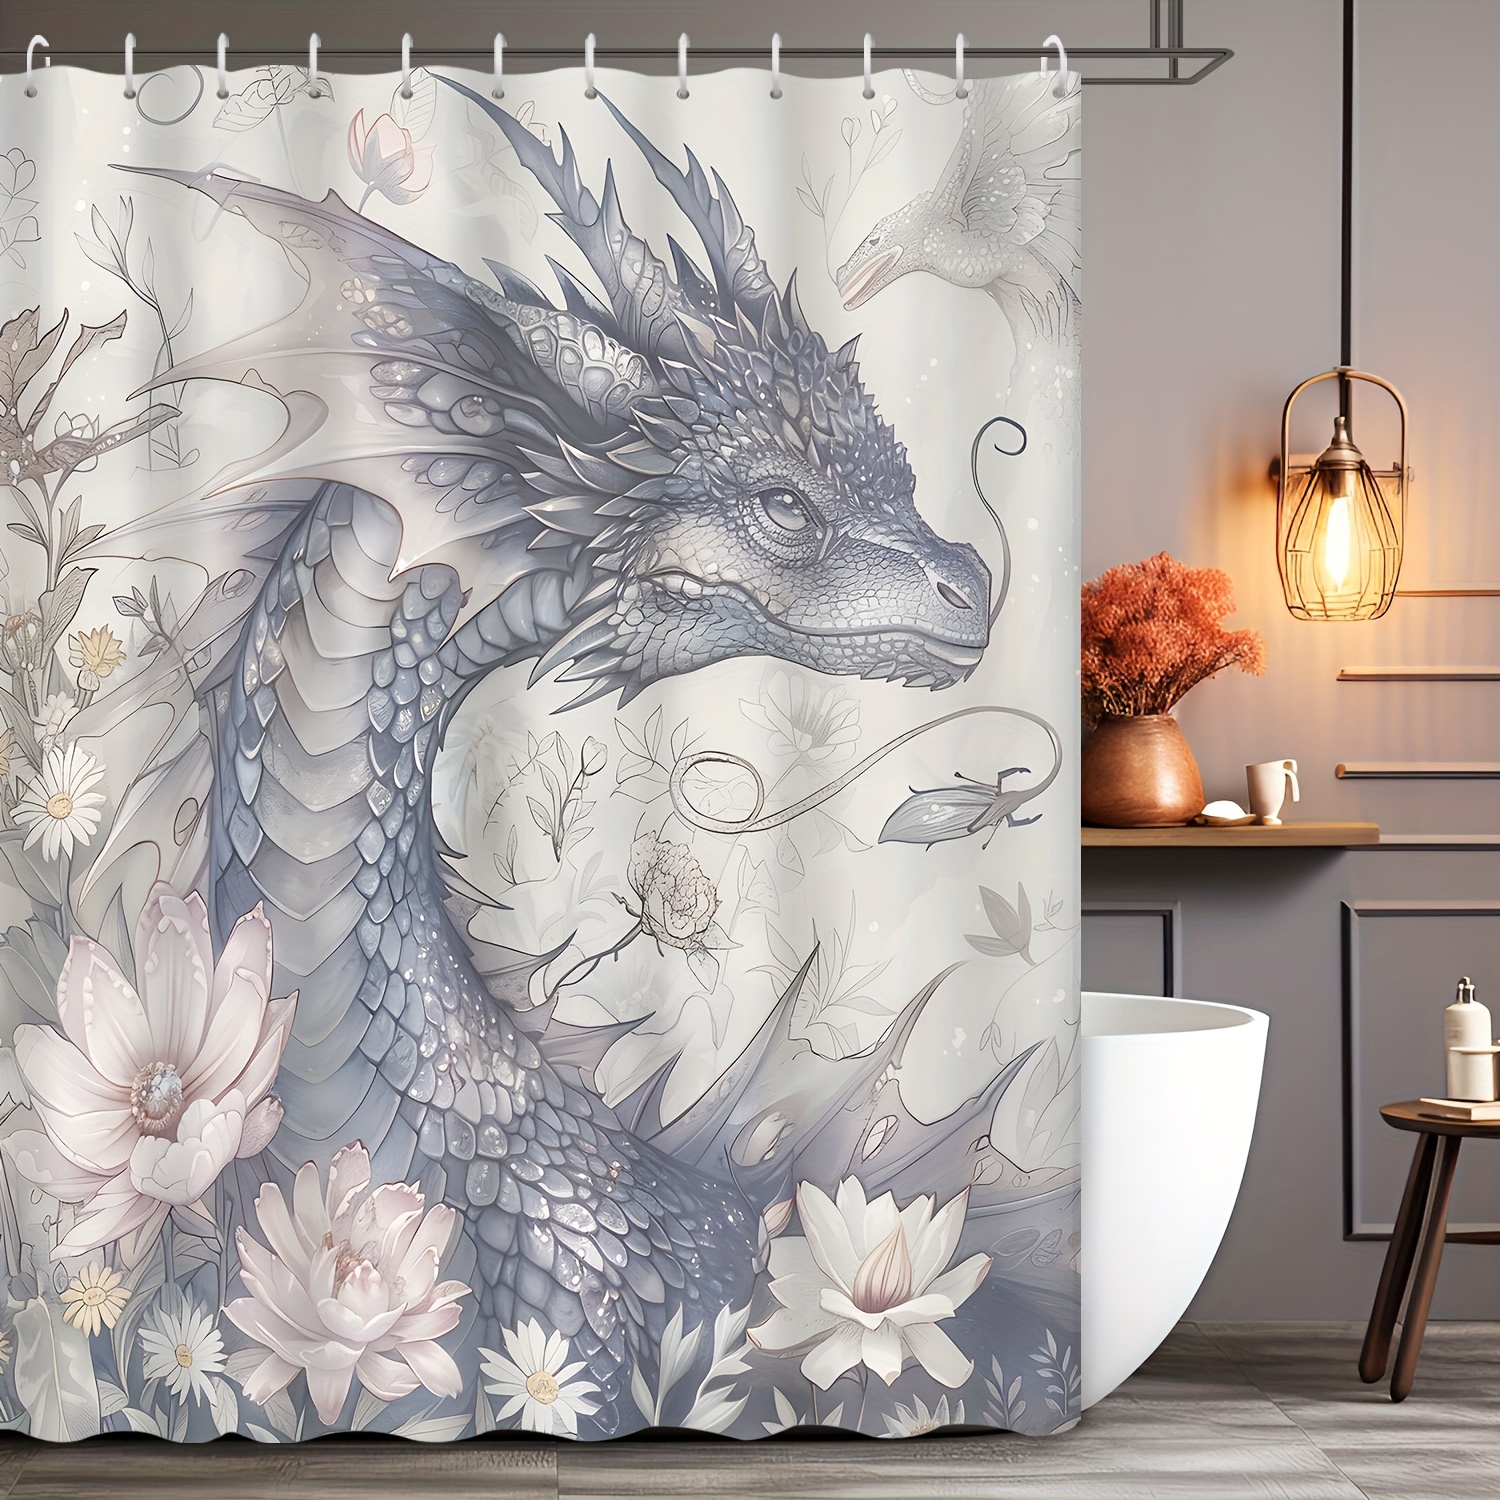 

Water-resistant Polyester Shower Curtain With Dragon And Floral Print, Machine Washable, Includes Hooks, Fantasy Themed Bathroom Decor, Grommet Top, Woven Fabric, 72 X 72 Inches